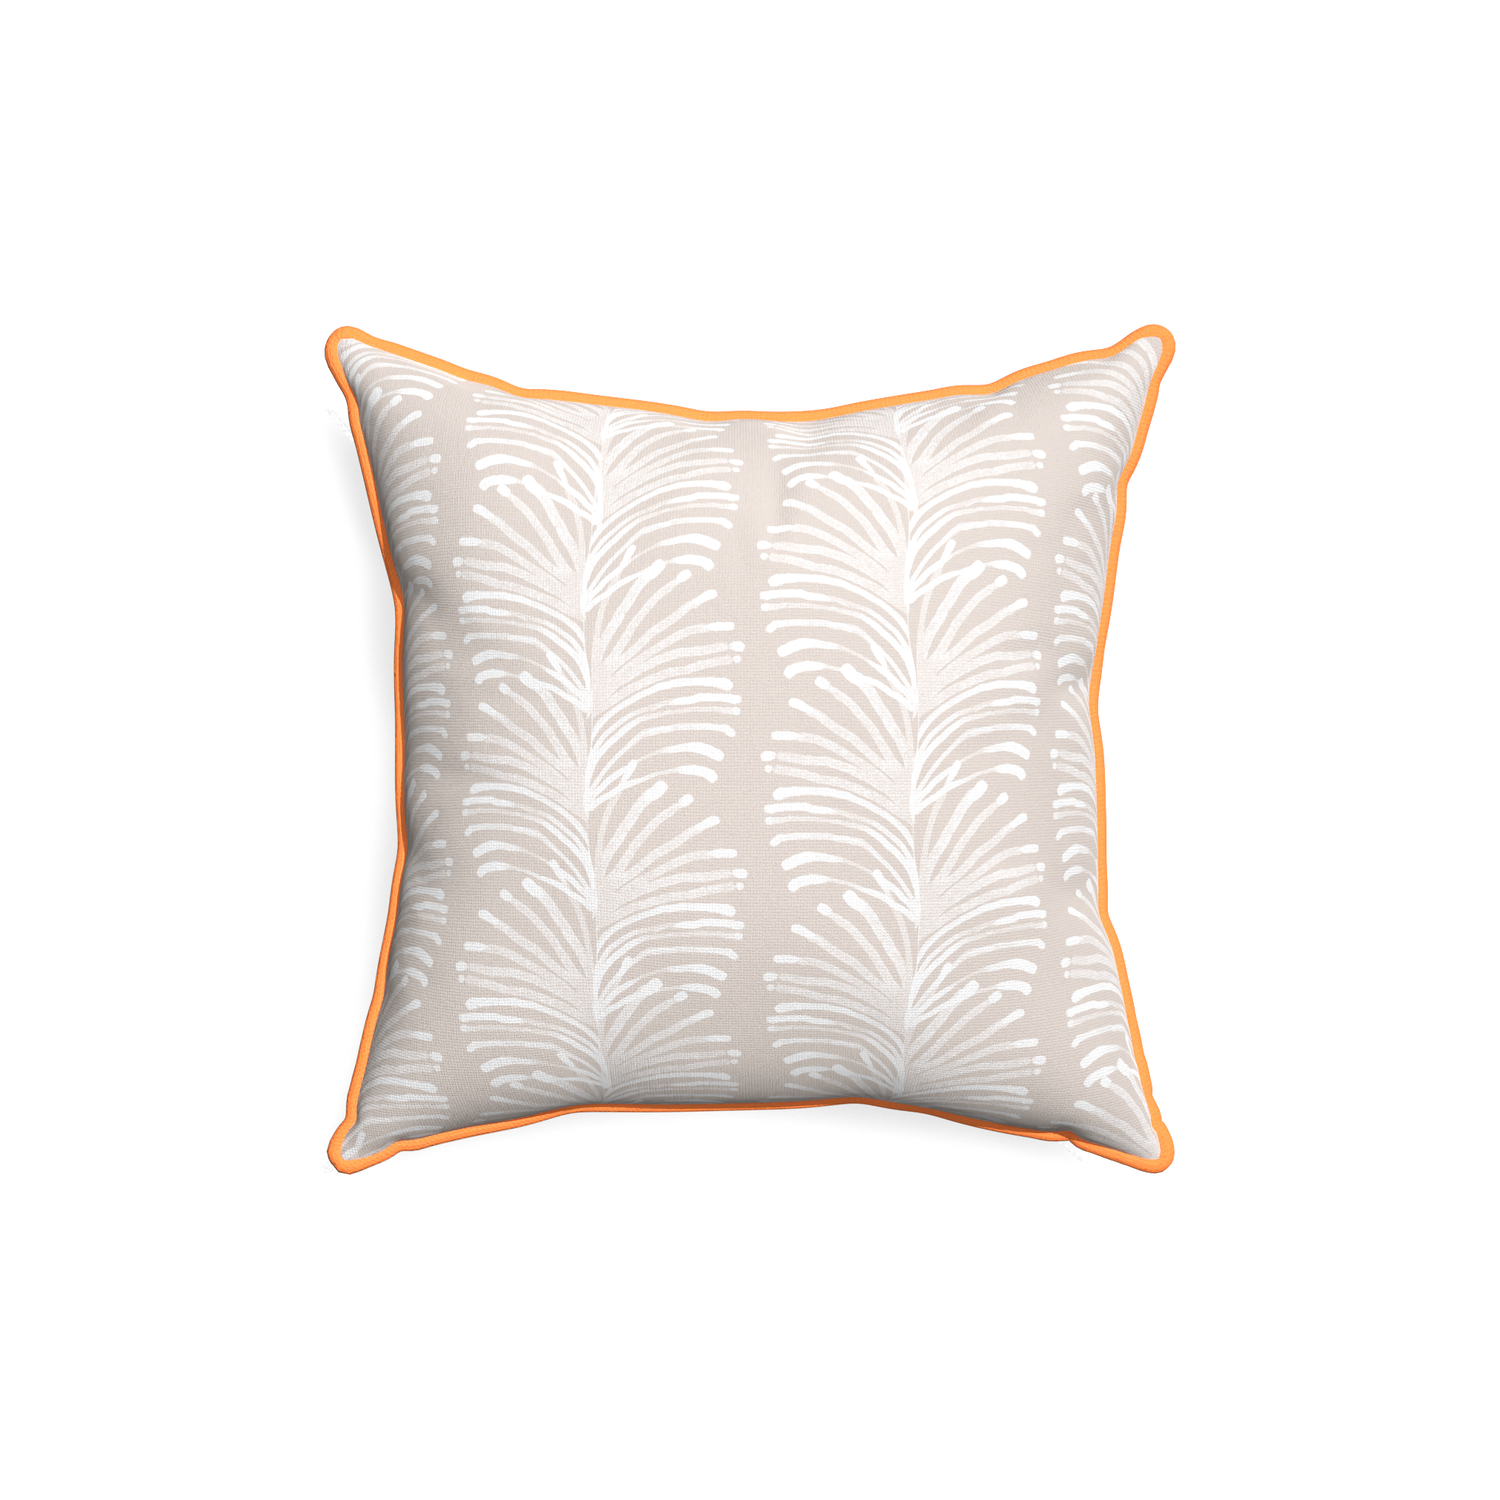 18-square emma sand custom pillow with clementine piping on white background